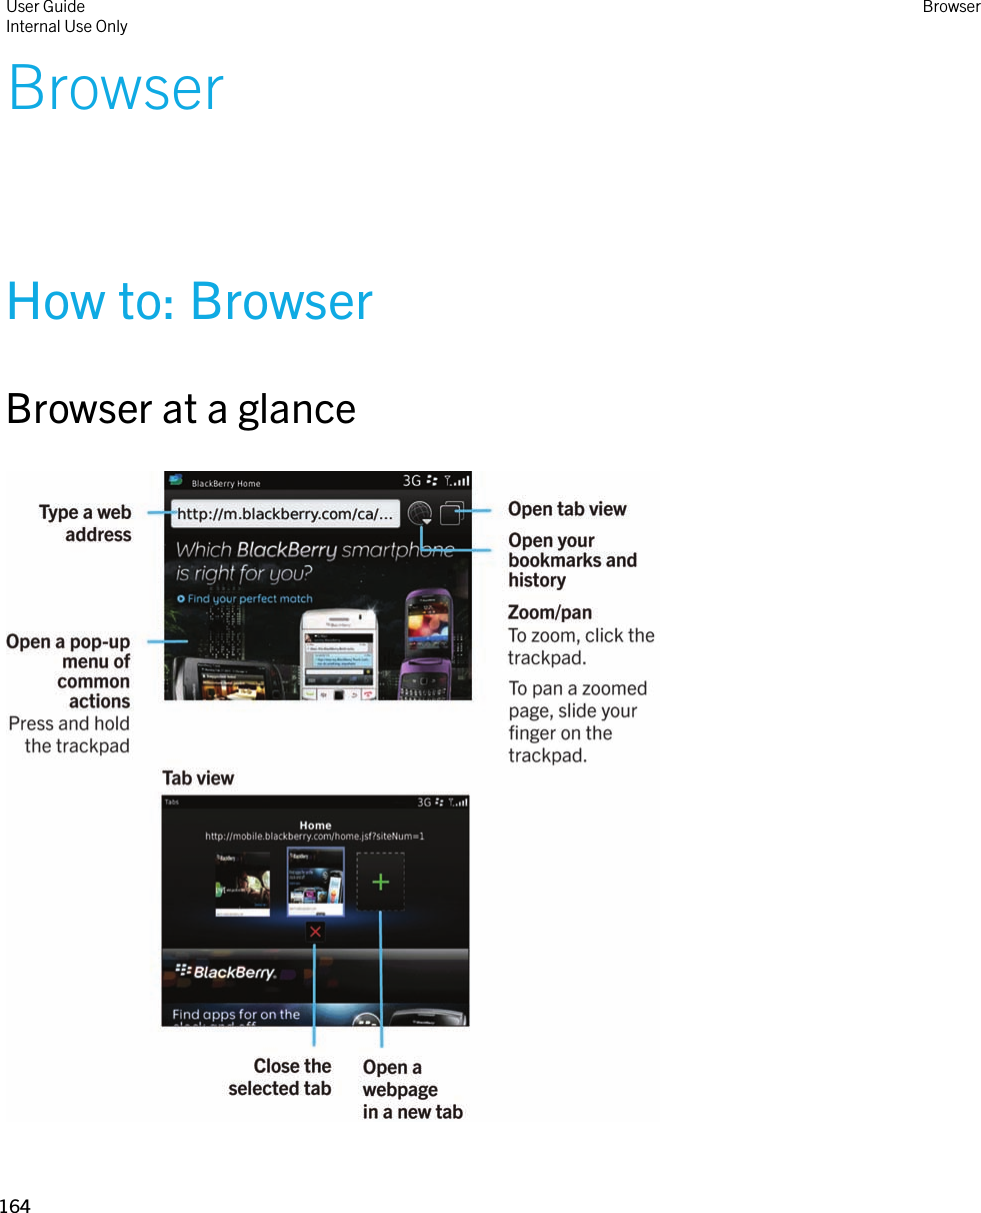 BrowserHow to: BrowserBrowser at a glance  User GuideInternal Use Only Browser164 